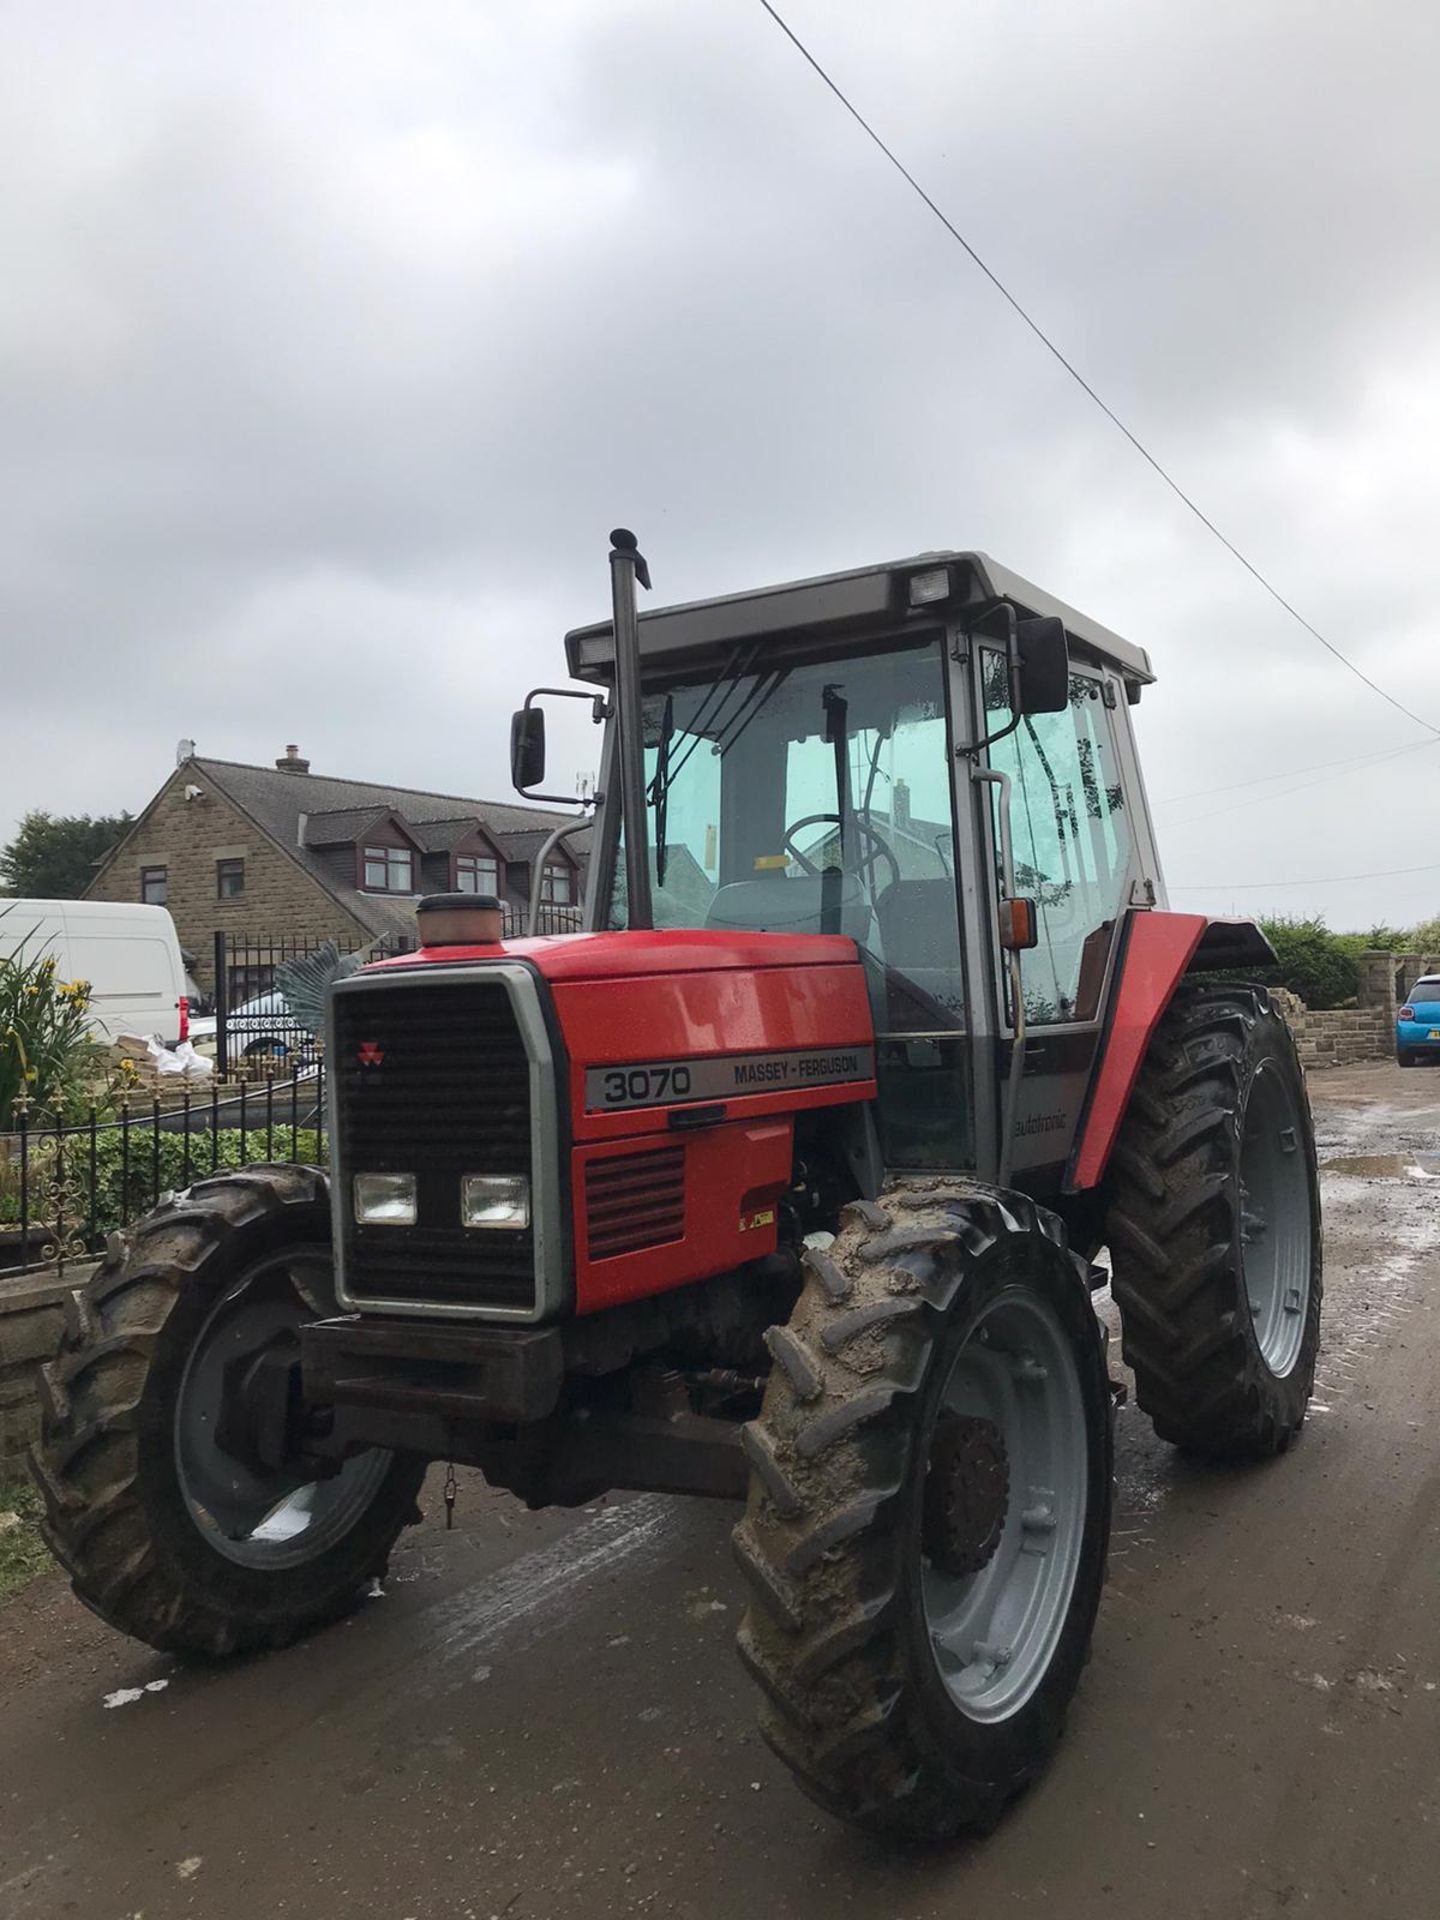 MASSEY FERGUSON 3070 TRACTOR, RUNS AND DRIVES WELL, CLEAN MACHINE, V5 INCLUDED *PLUS VAT* - Image 2 of 4